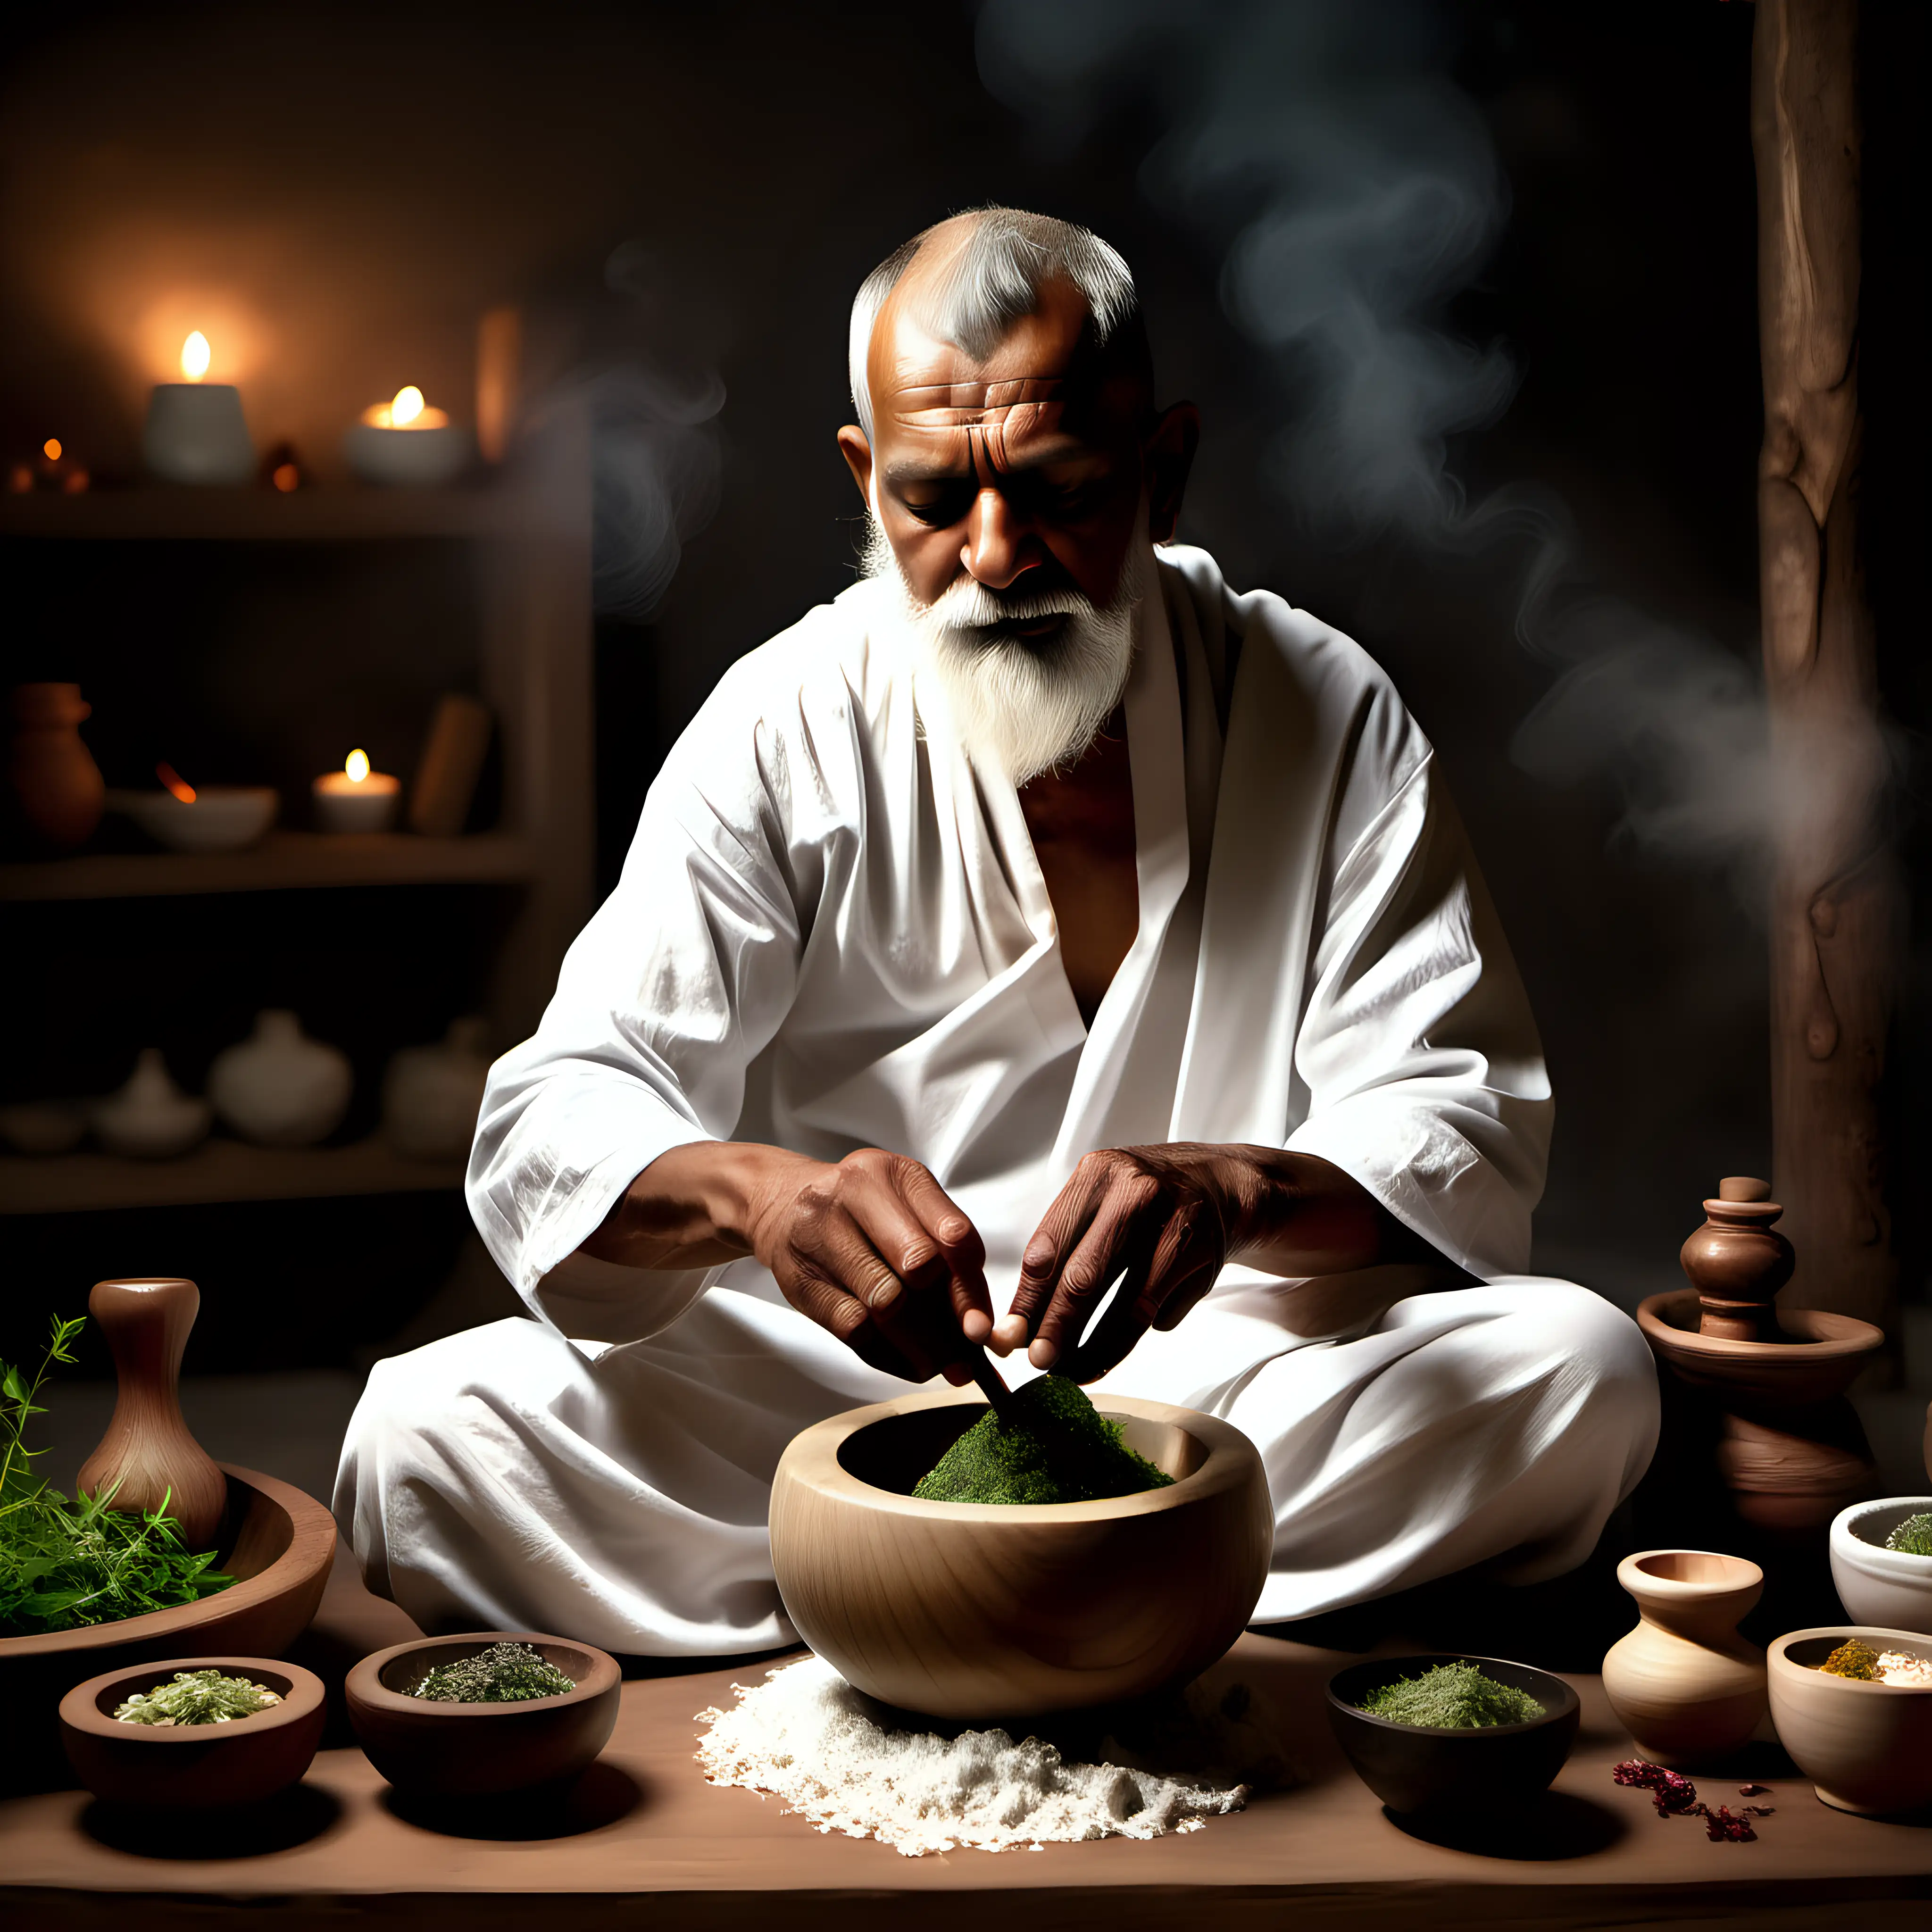 hyperrealistic master shot of a old yogi dressed white, sitting and preparing a ayurvedic medicine by crushing some herbs that are glowing inside a wooden pestle and mortar sitting in a serene ayurvedic setup